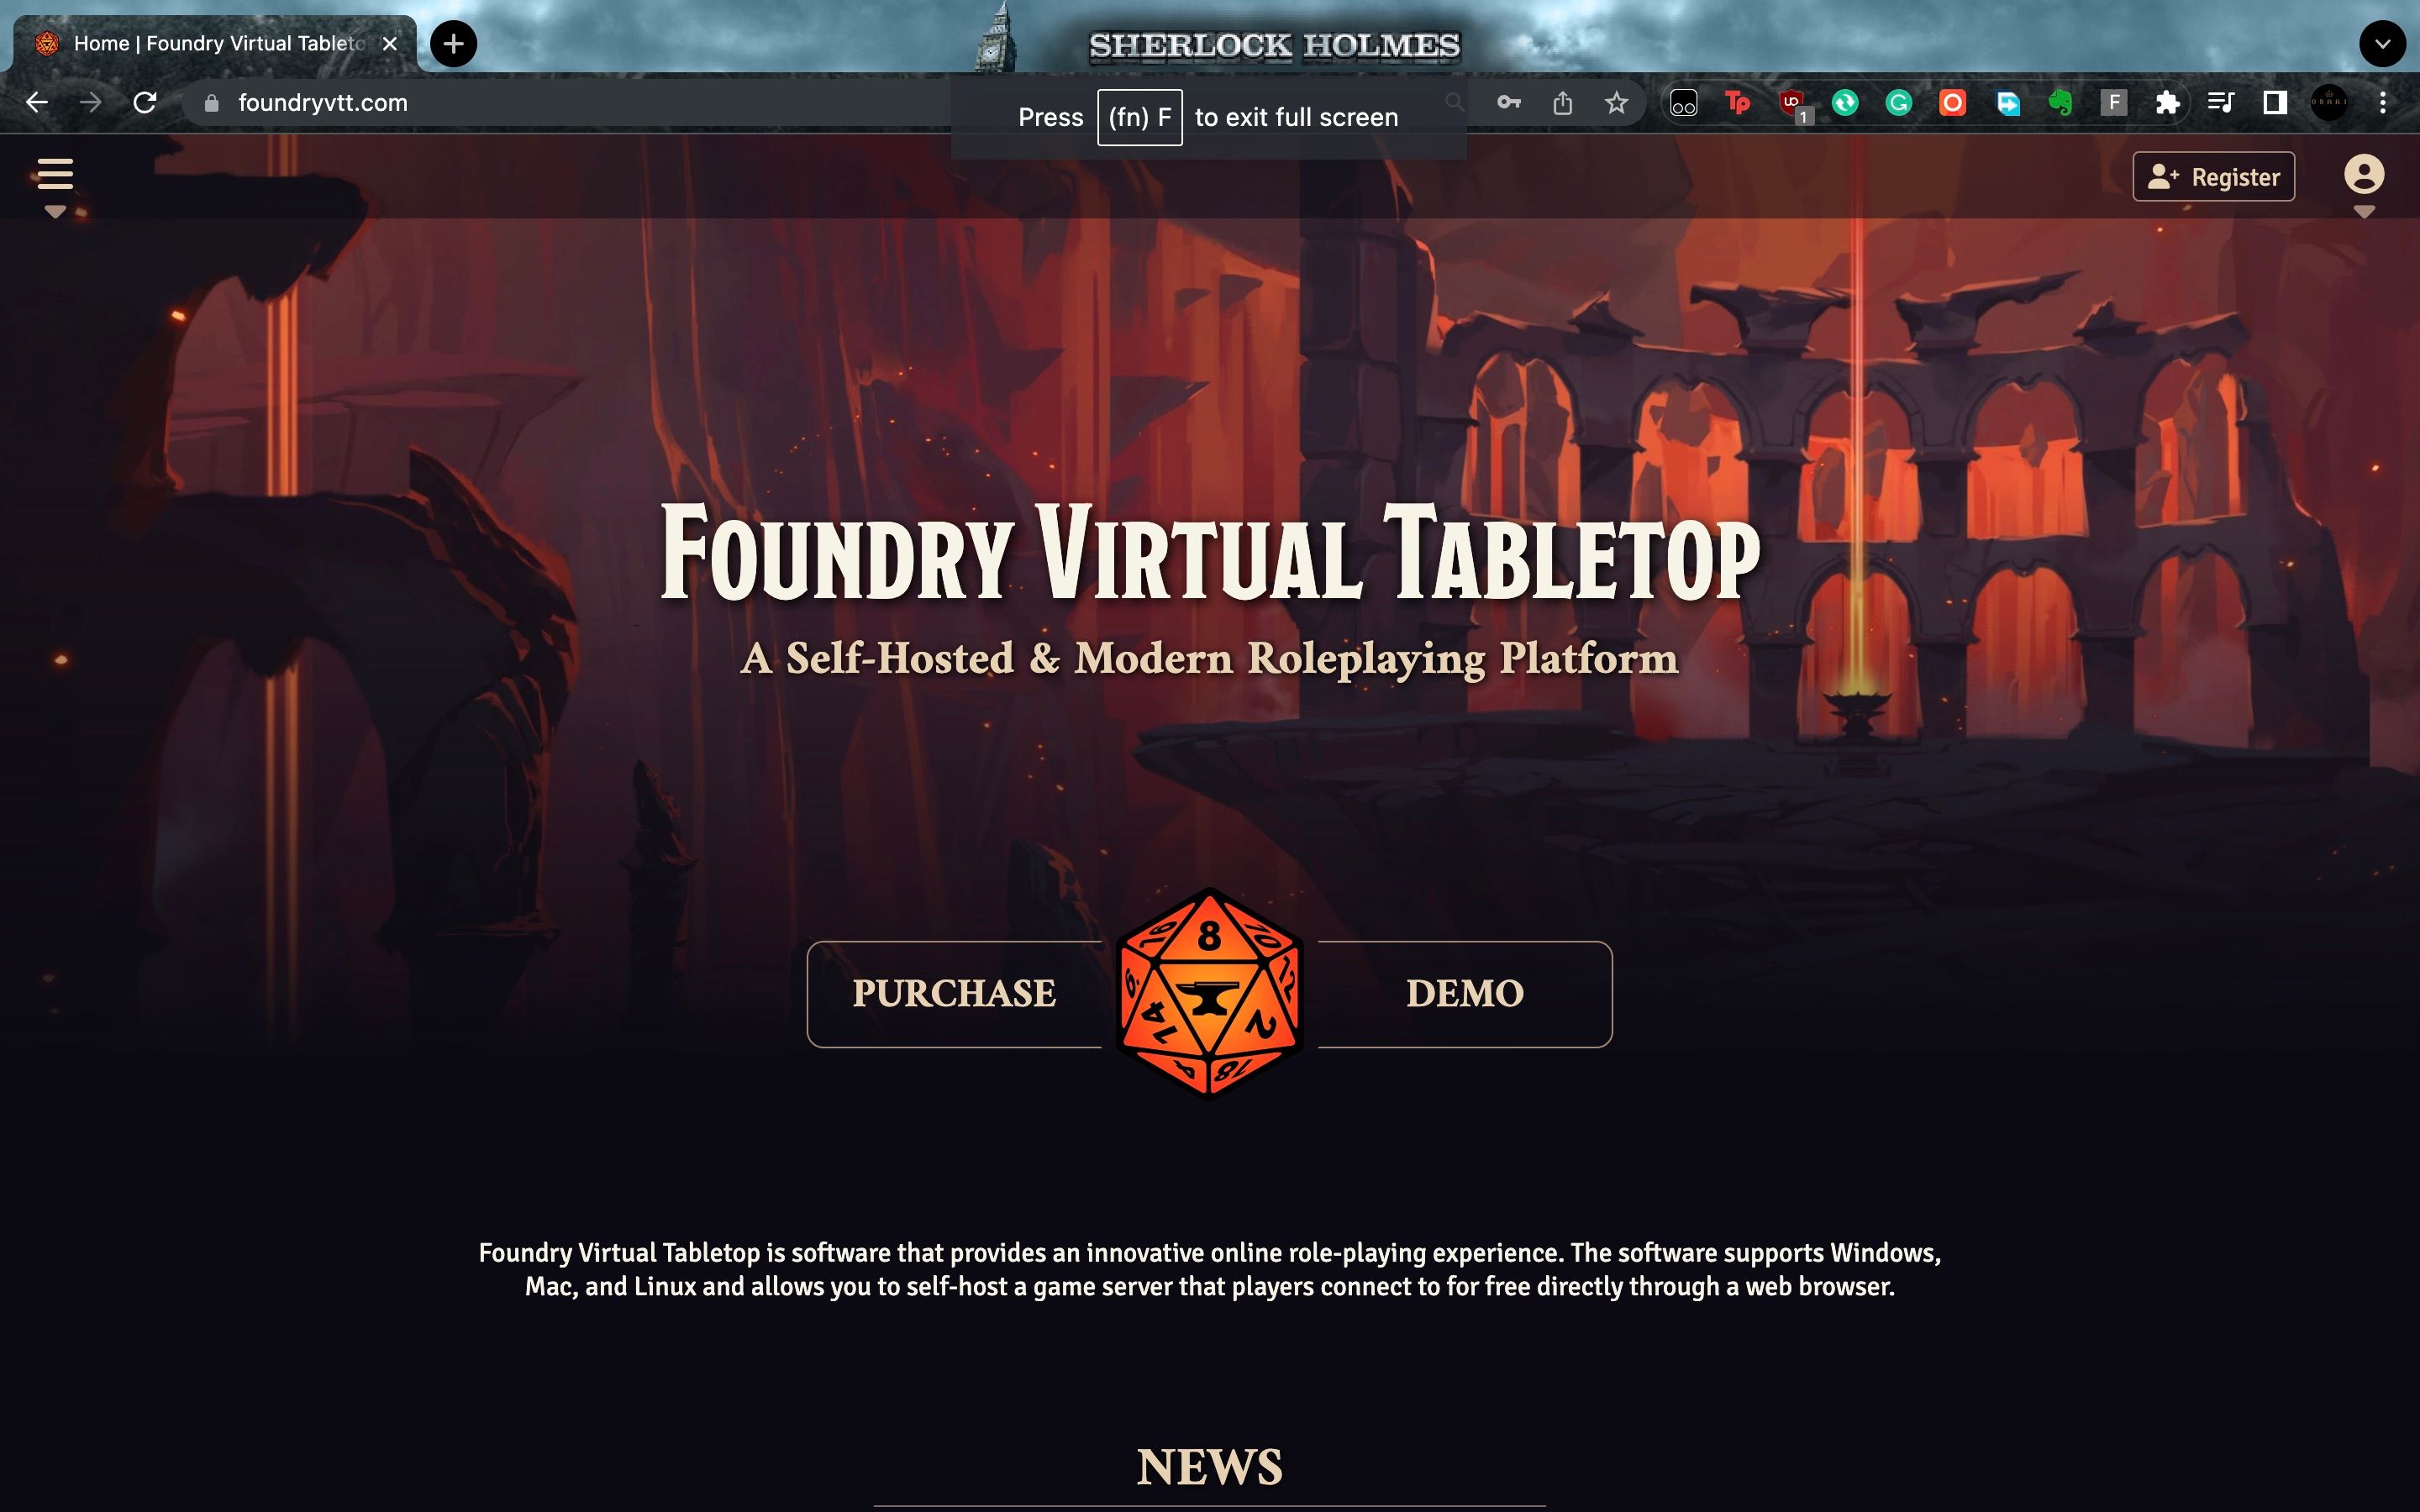 Foundry Virtual Tabletop website home page